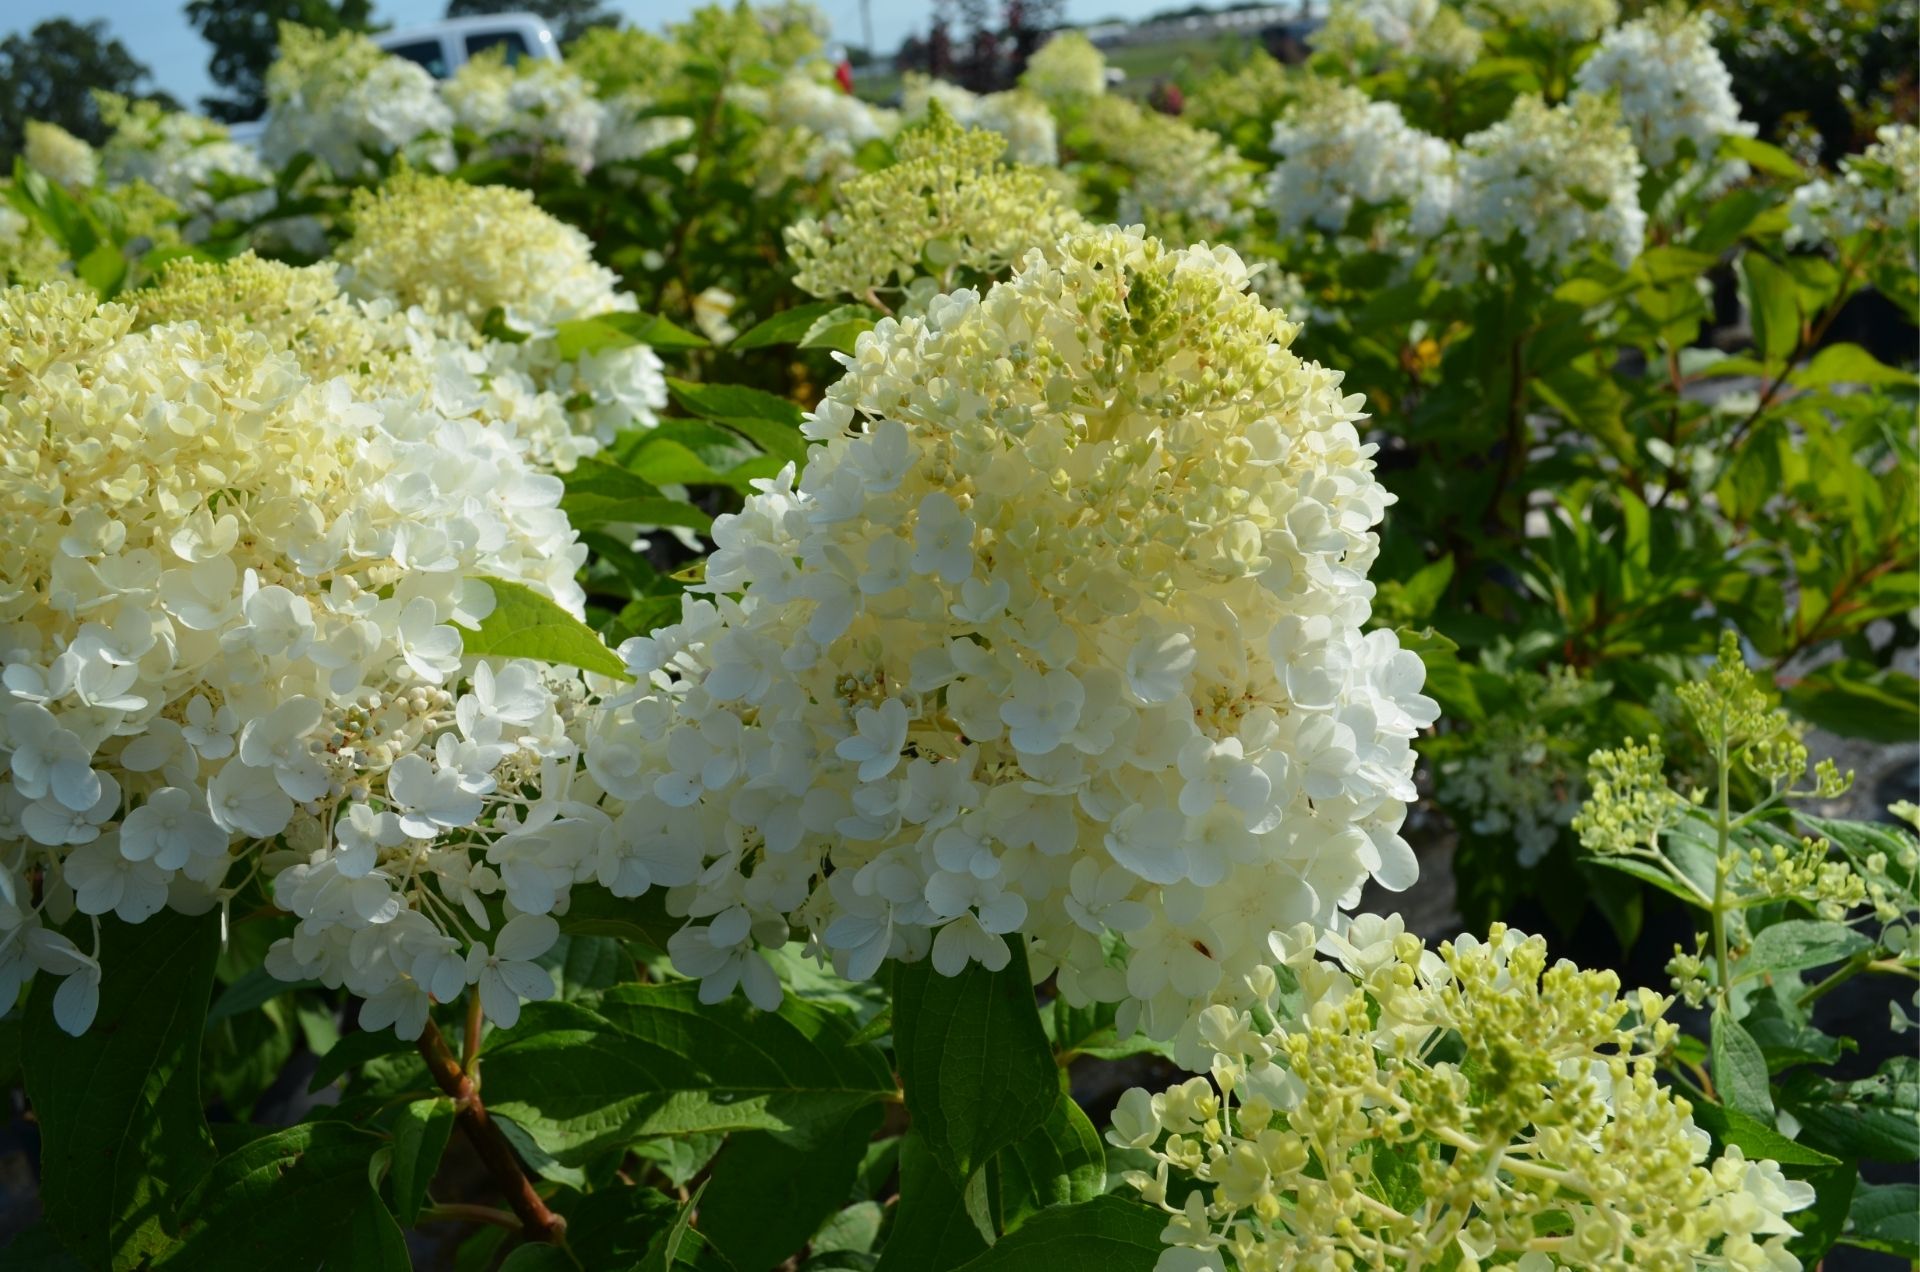 images/plants/hydrangea/hyd-magical-ruby-snow/hyd-magical-ruby-snow-0002.jpg